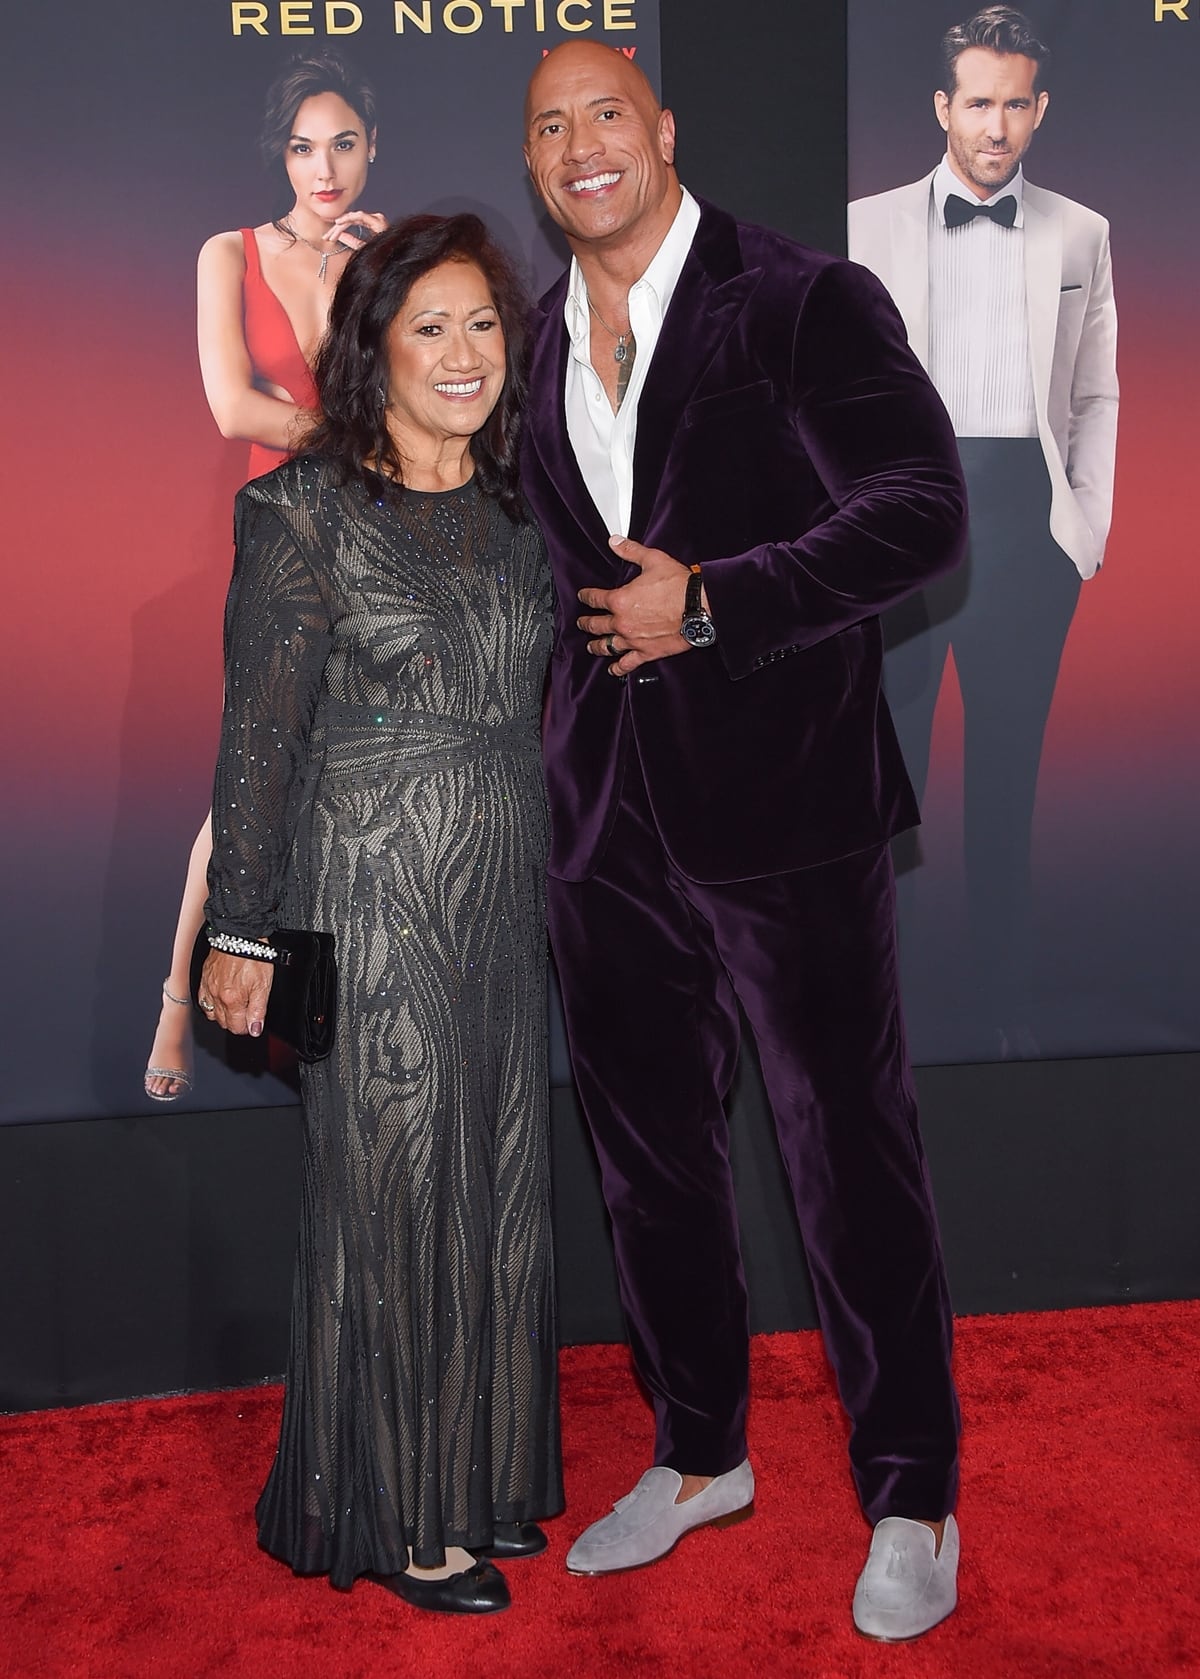 Dwayne Johnson's Real Height Revealed: The Rock is not 6'5